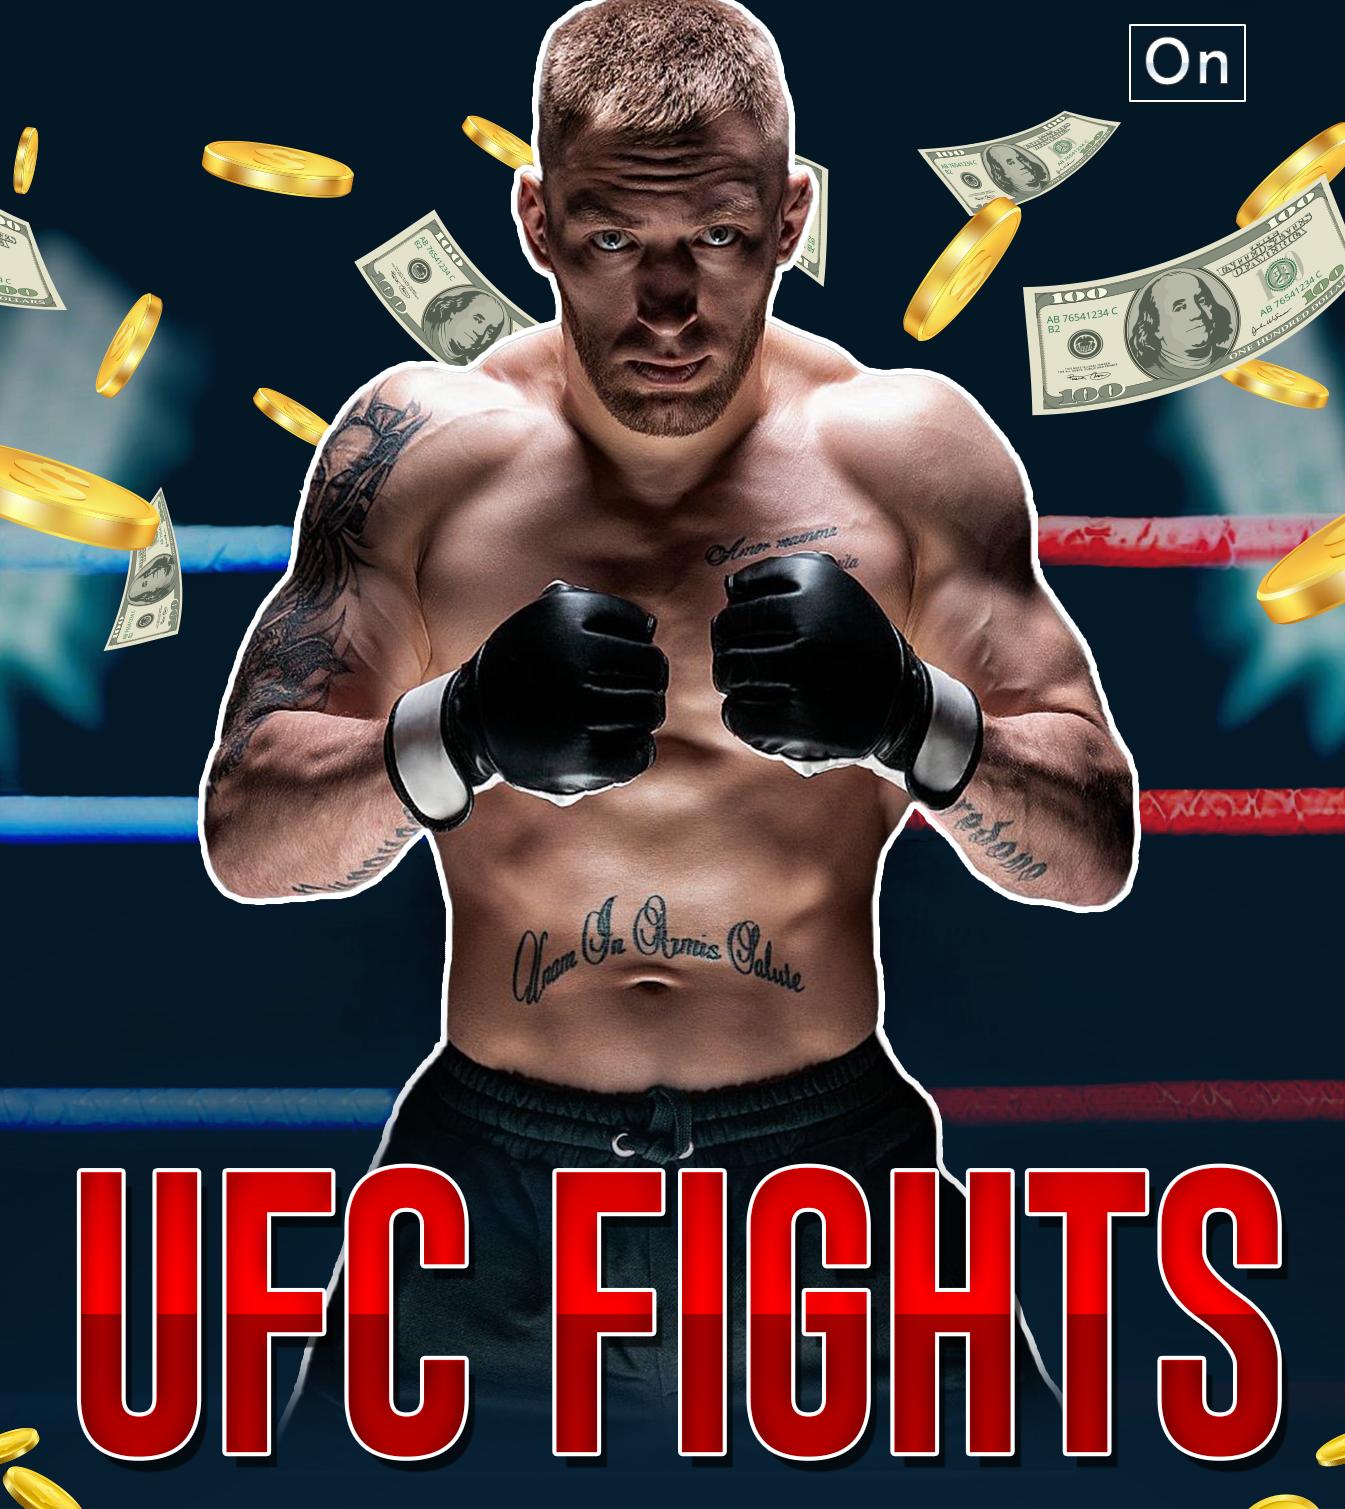 How To Make Winning Bets On UFC Fights